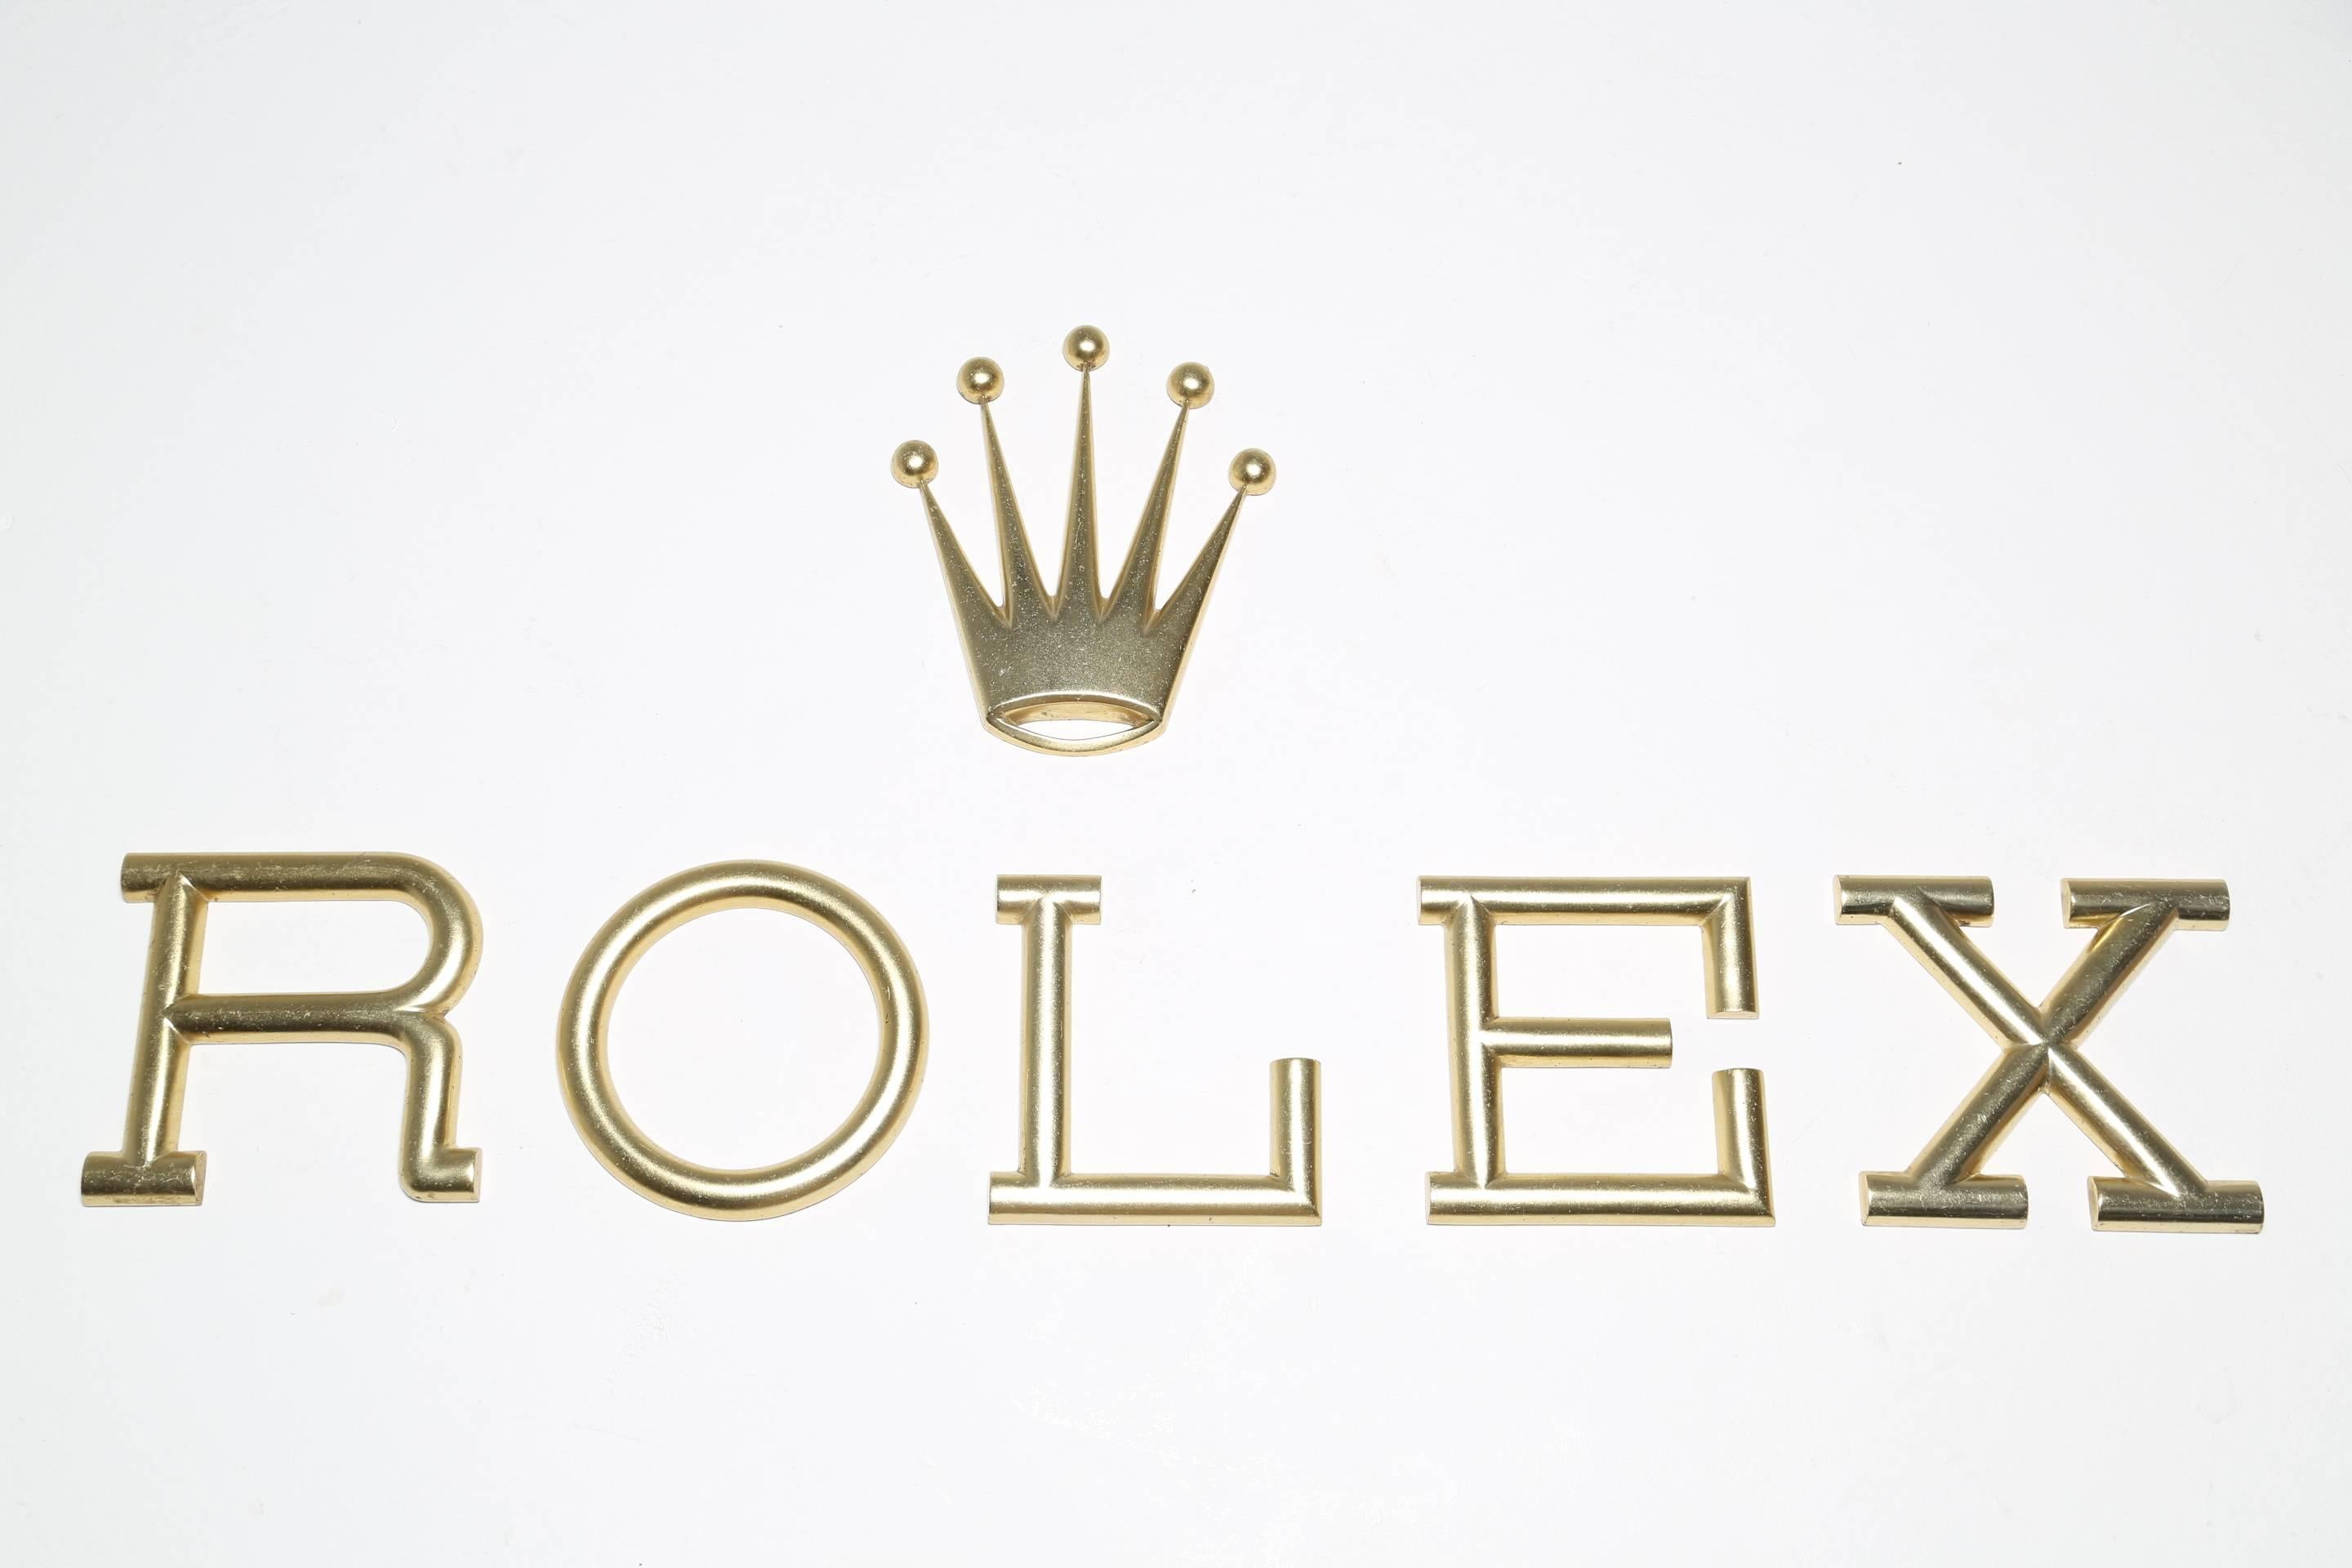 Original Rolex Shopfront sign in brass plated aluminium. Sourced in the mid 1980's from an old watch shop in Dublin. All individual letters to make up the Rolex sign, these letters are significantly bigger than any other brass letter Rolex signs